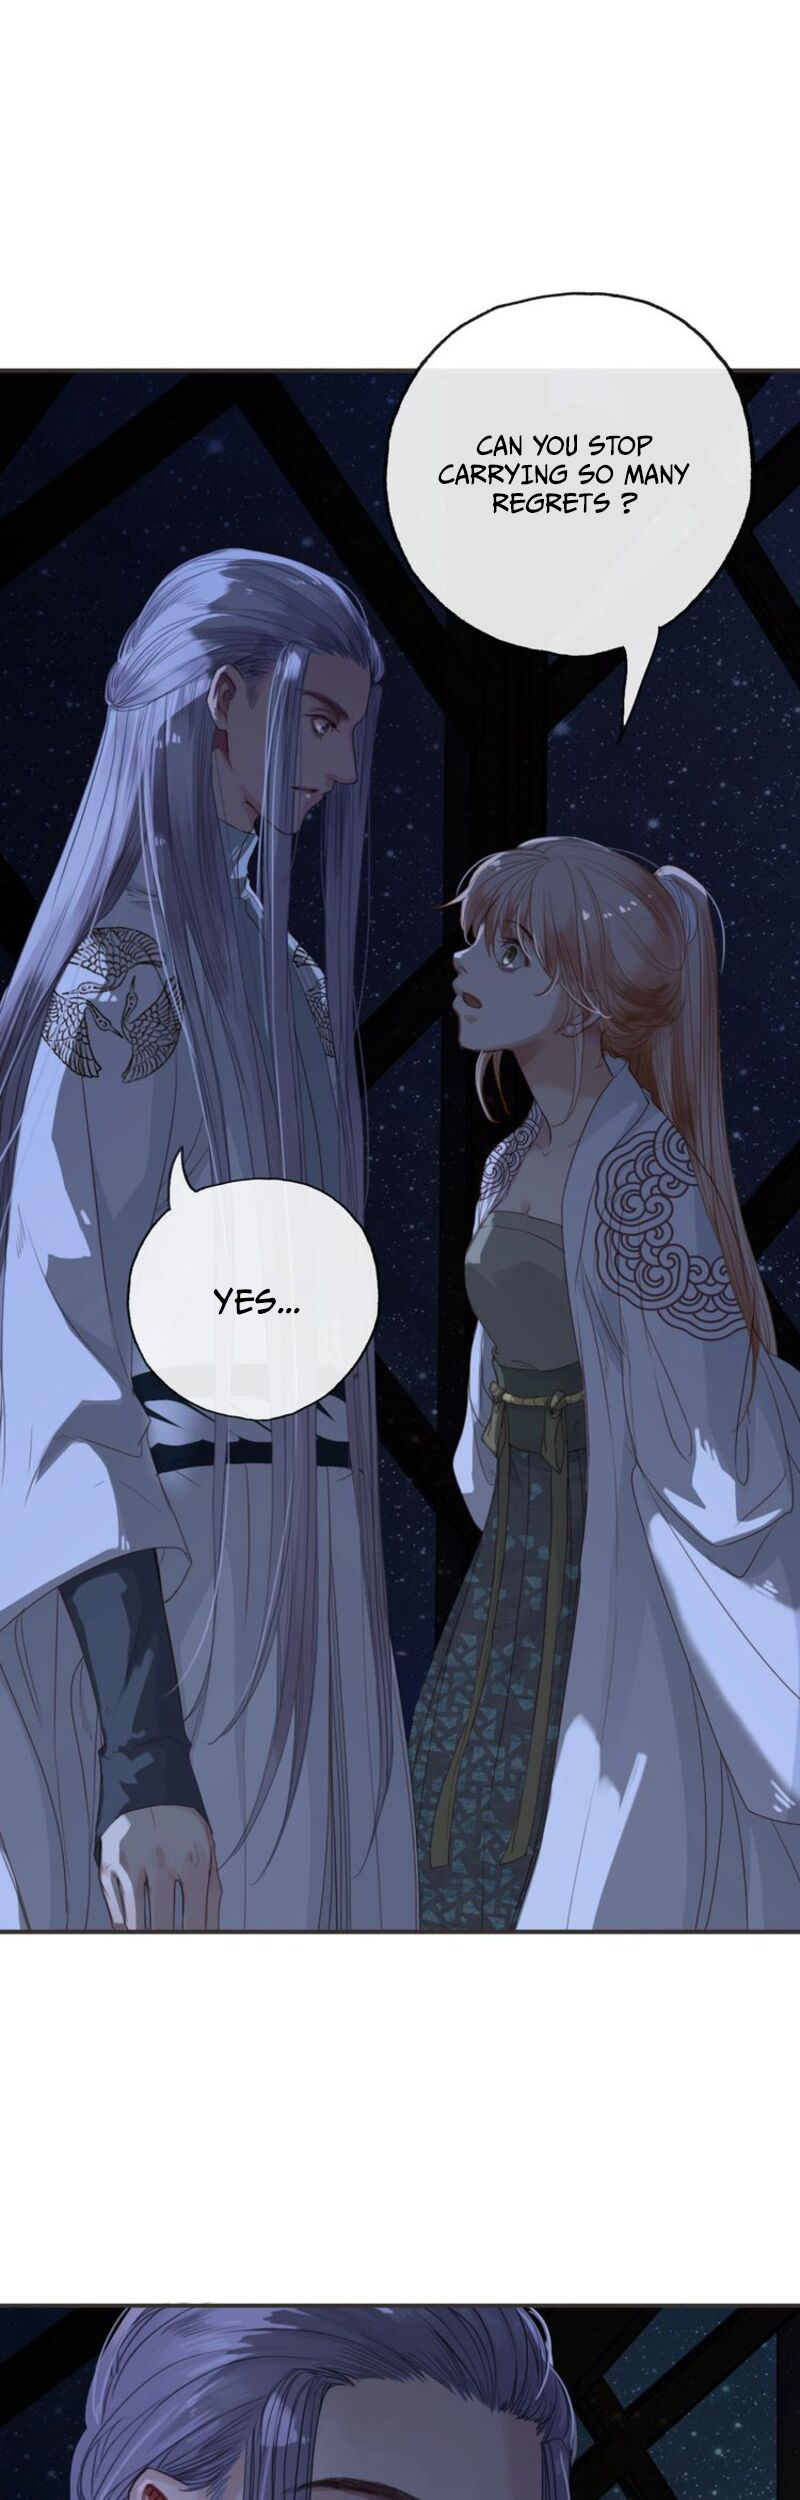 Song of the Long Night Ch. 9 Is It Her ?